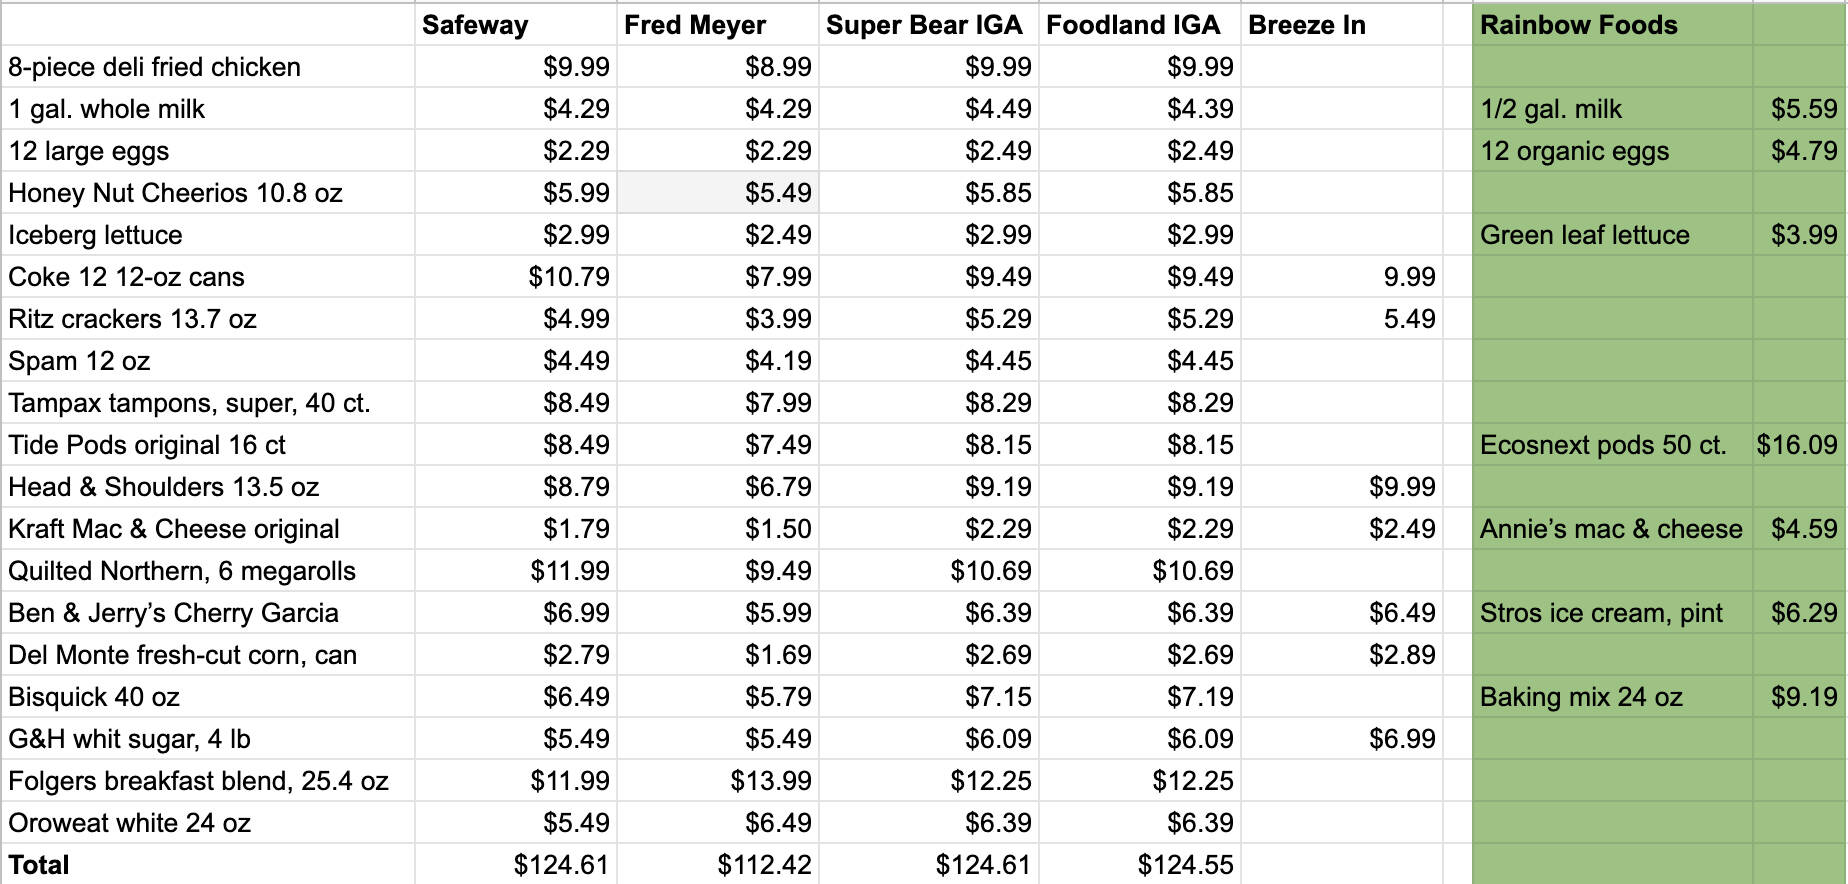 A spreadsheet shows the non-sale prices on 20 items at Juneau’s four main grocery stores as of July 1, for the limited identical items available at the Valley Breeze In, and for the limited reasonably comparable items available at Rainbow Foods. (Mark Sabbatini / Juneau Empire)